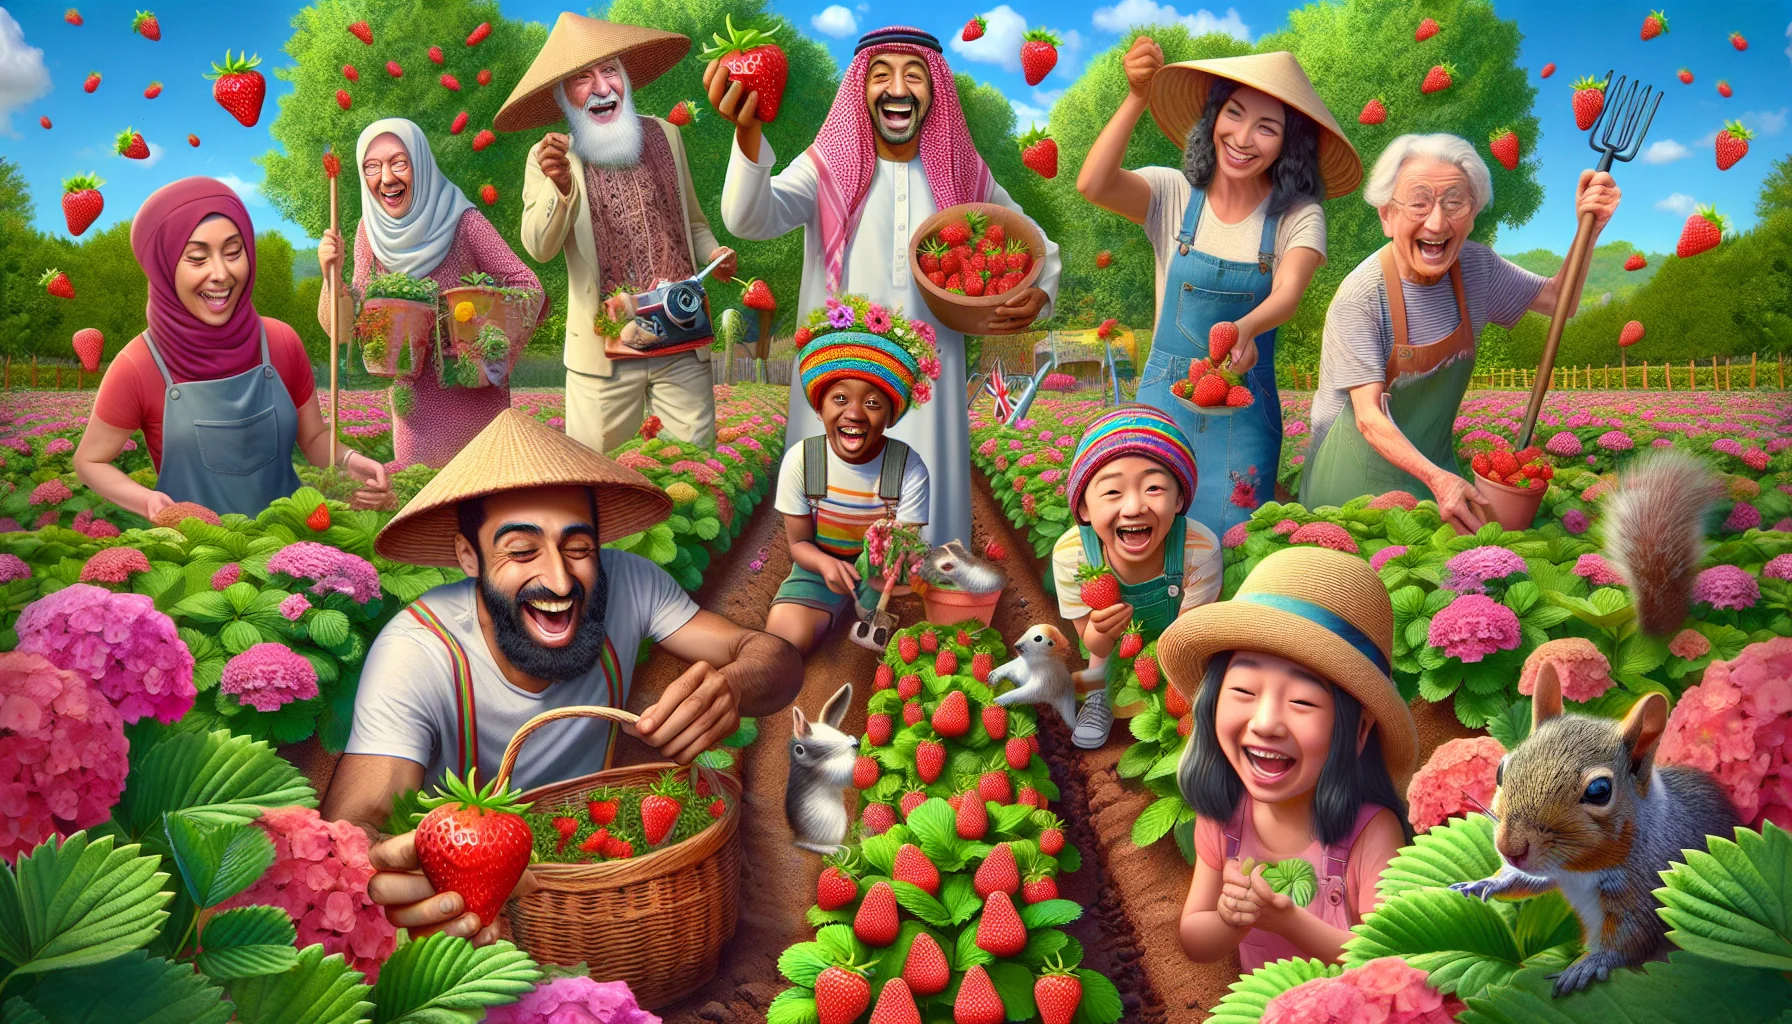 Imagine an amusing and appealing gardening scene created to entice individuals to take up the hobby of gardening. Picture a bustling garden filled with strawberry plants in full bloom with vivid pink strawberry blossoms contrasting against the rich green leaves. Now, add to this scenario, a diverse group of people: a Middle-Eastern male, a South Asian female, a White youngster, and a Black elderly woman, all laughing and having fun while gardening together. They wear a variety of vibrant gardening hats, and a friendly squirrel can be seen stealing a strawberry.